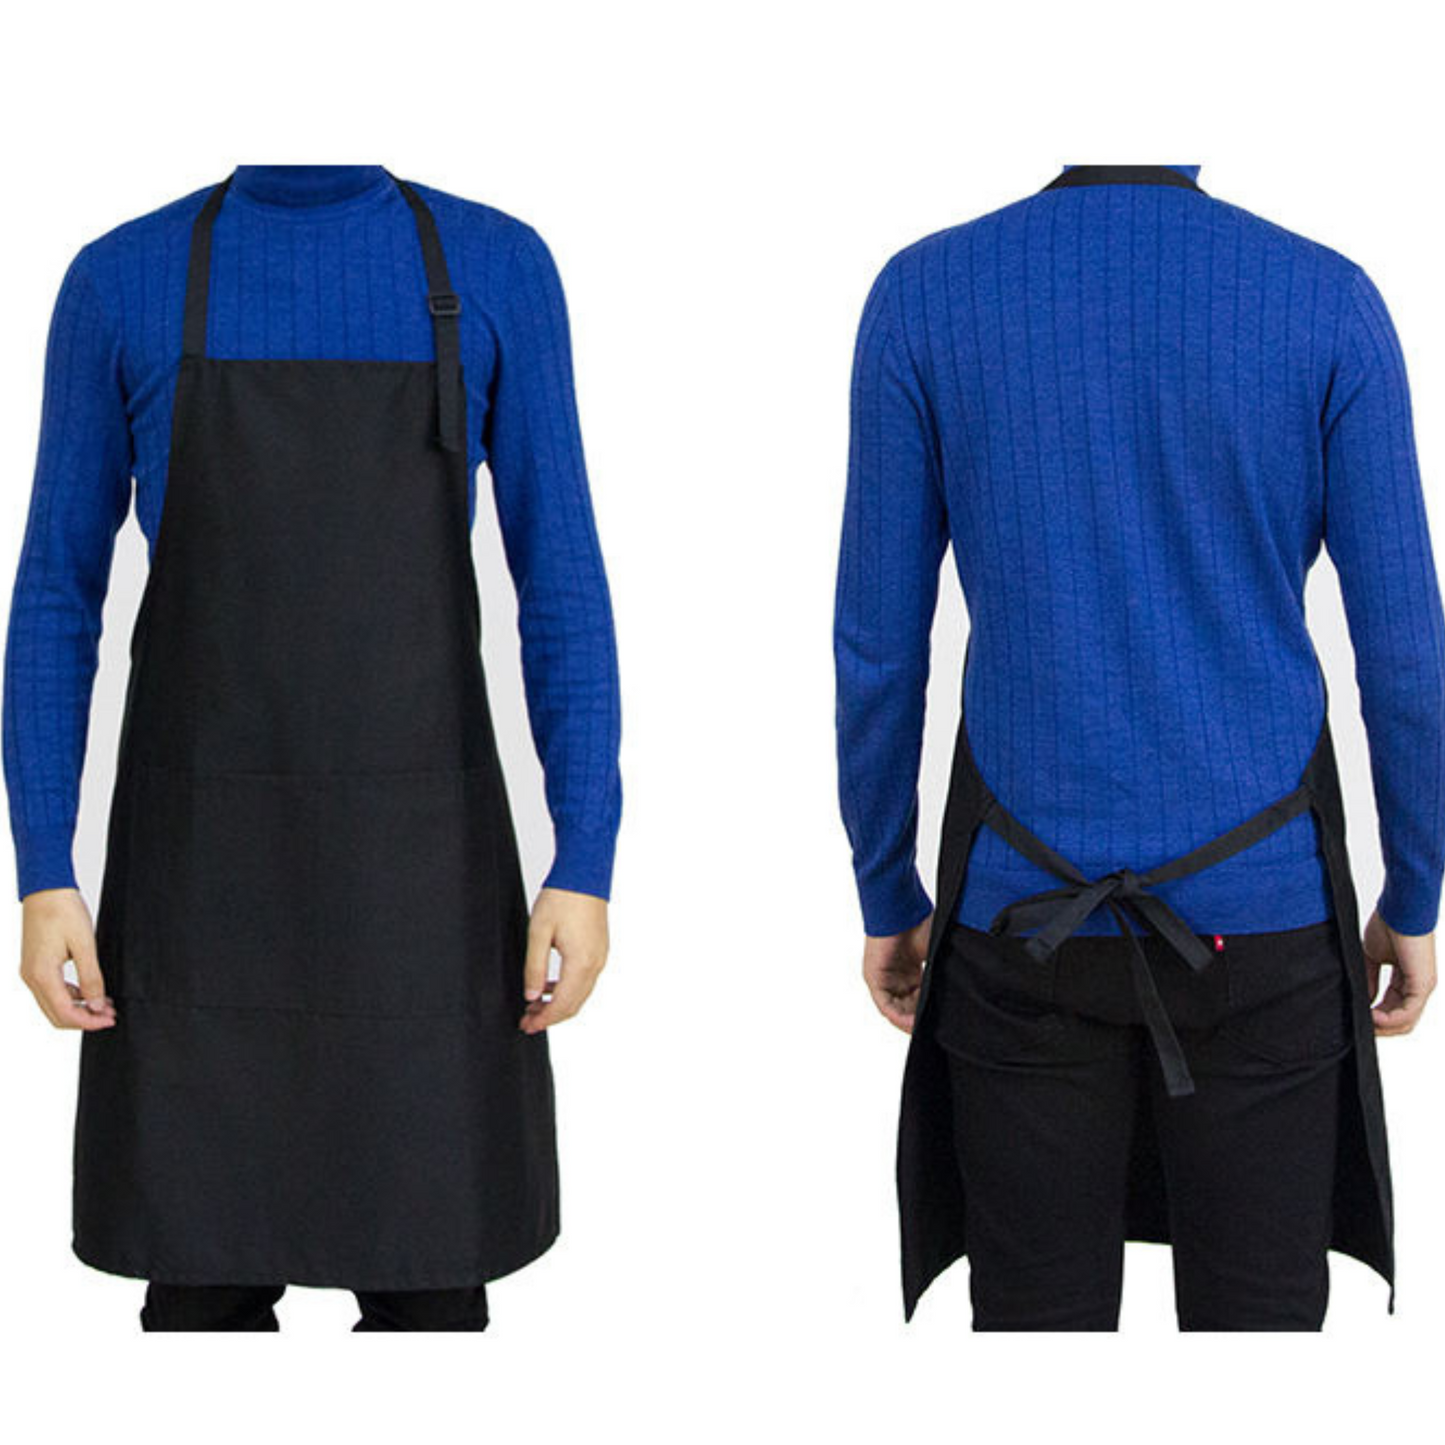 Apron with pockets in front; 07TD/HH;